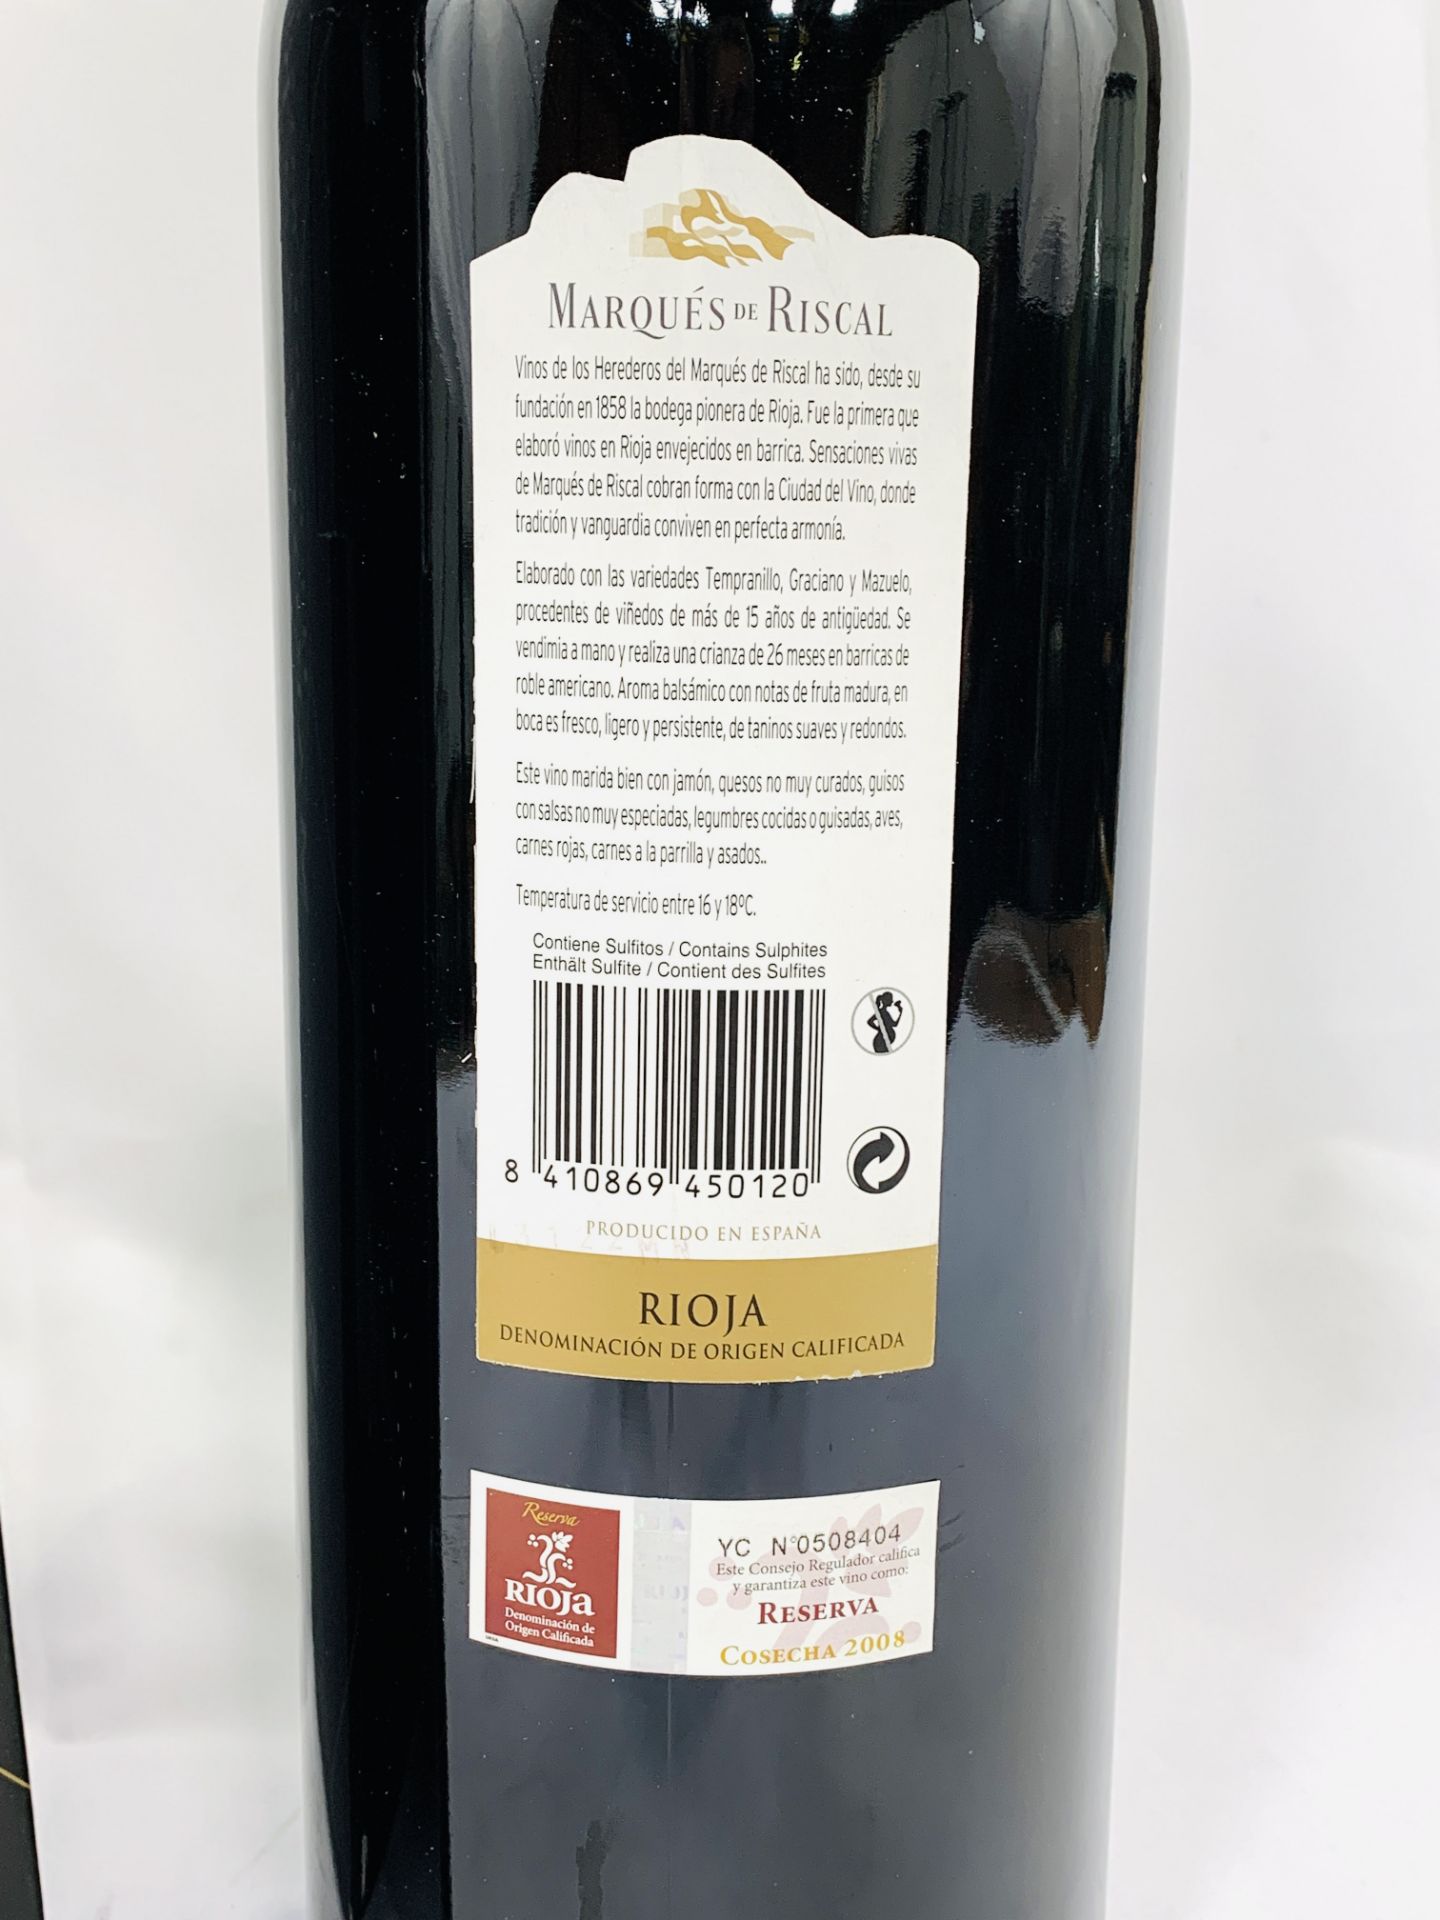 3Ltr bottle of Herederos Del Marques De Riscal Rioja Reserva 2008 - Image 2 of 2